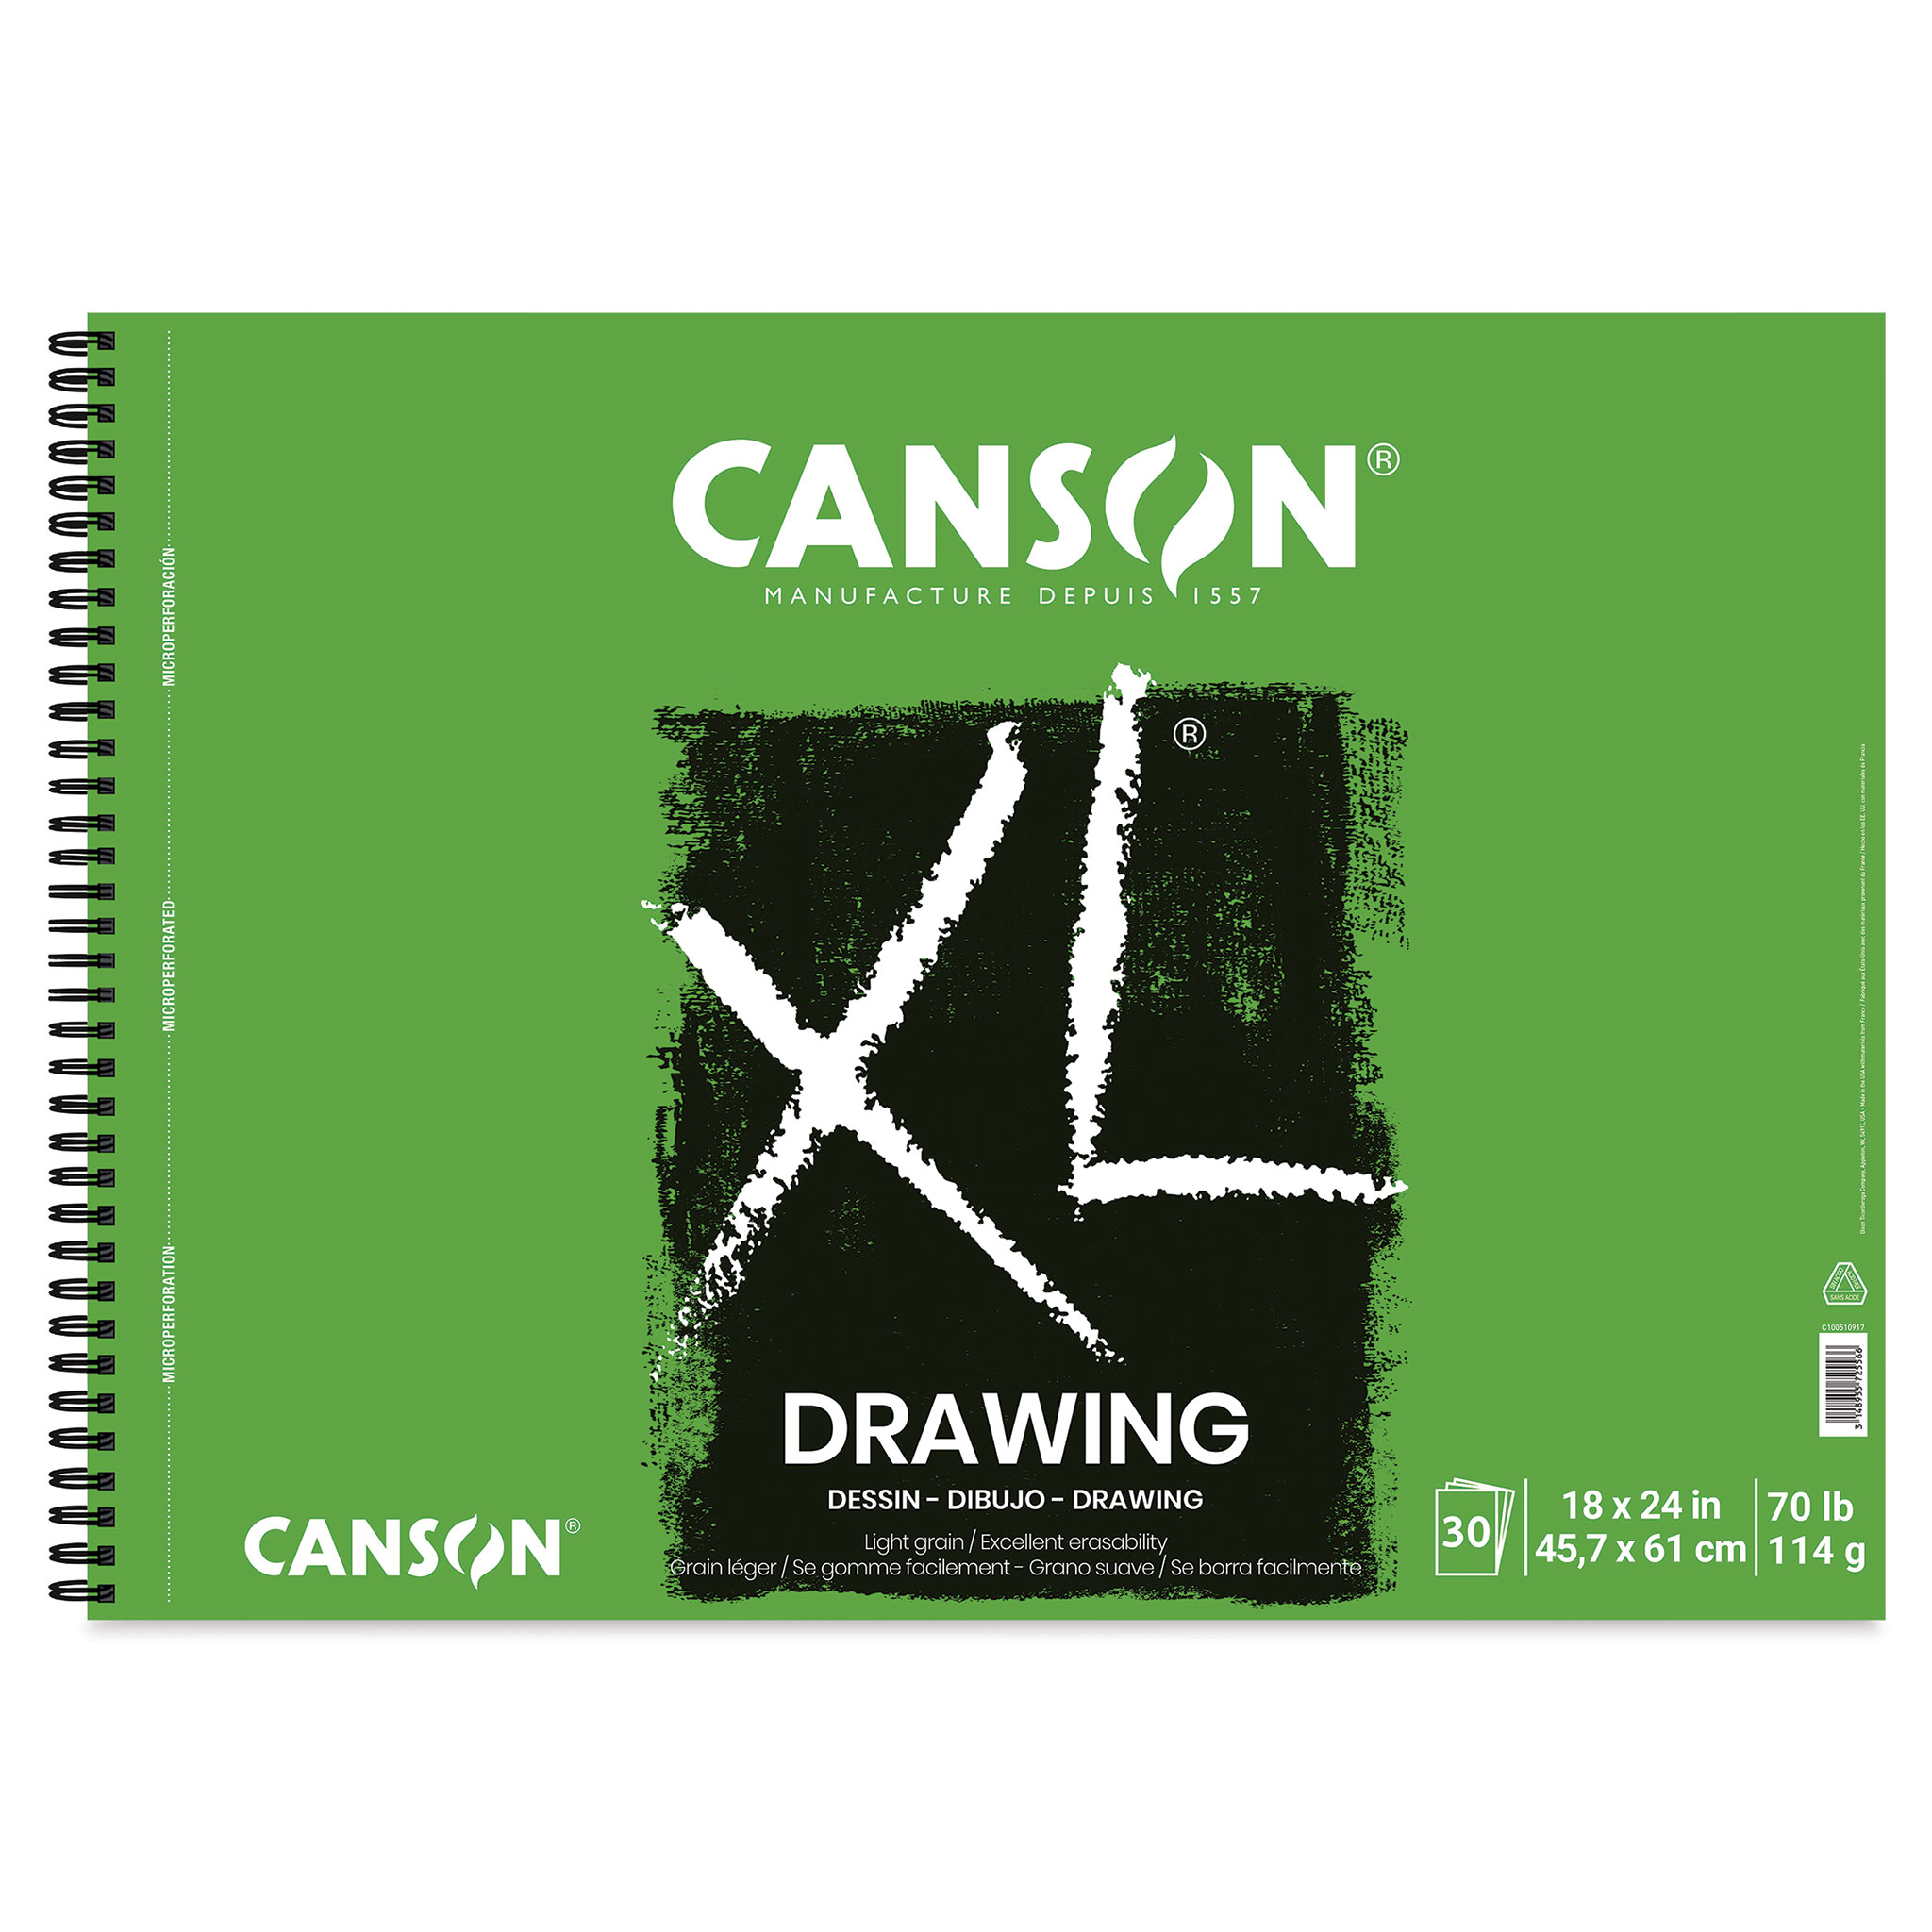 Canson XL Series Drawing Paper, Black, Wirebound Pad, 11x14 inches, 40  Sheets (92lb/150g) - Artist Paper for Adults and Students - Colored Pencil